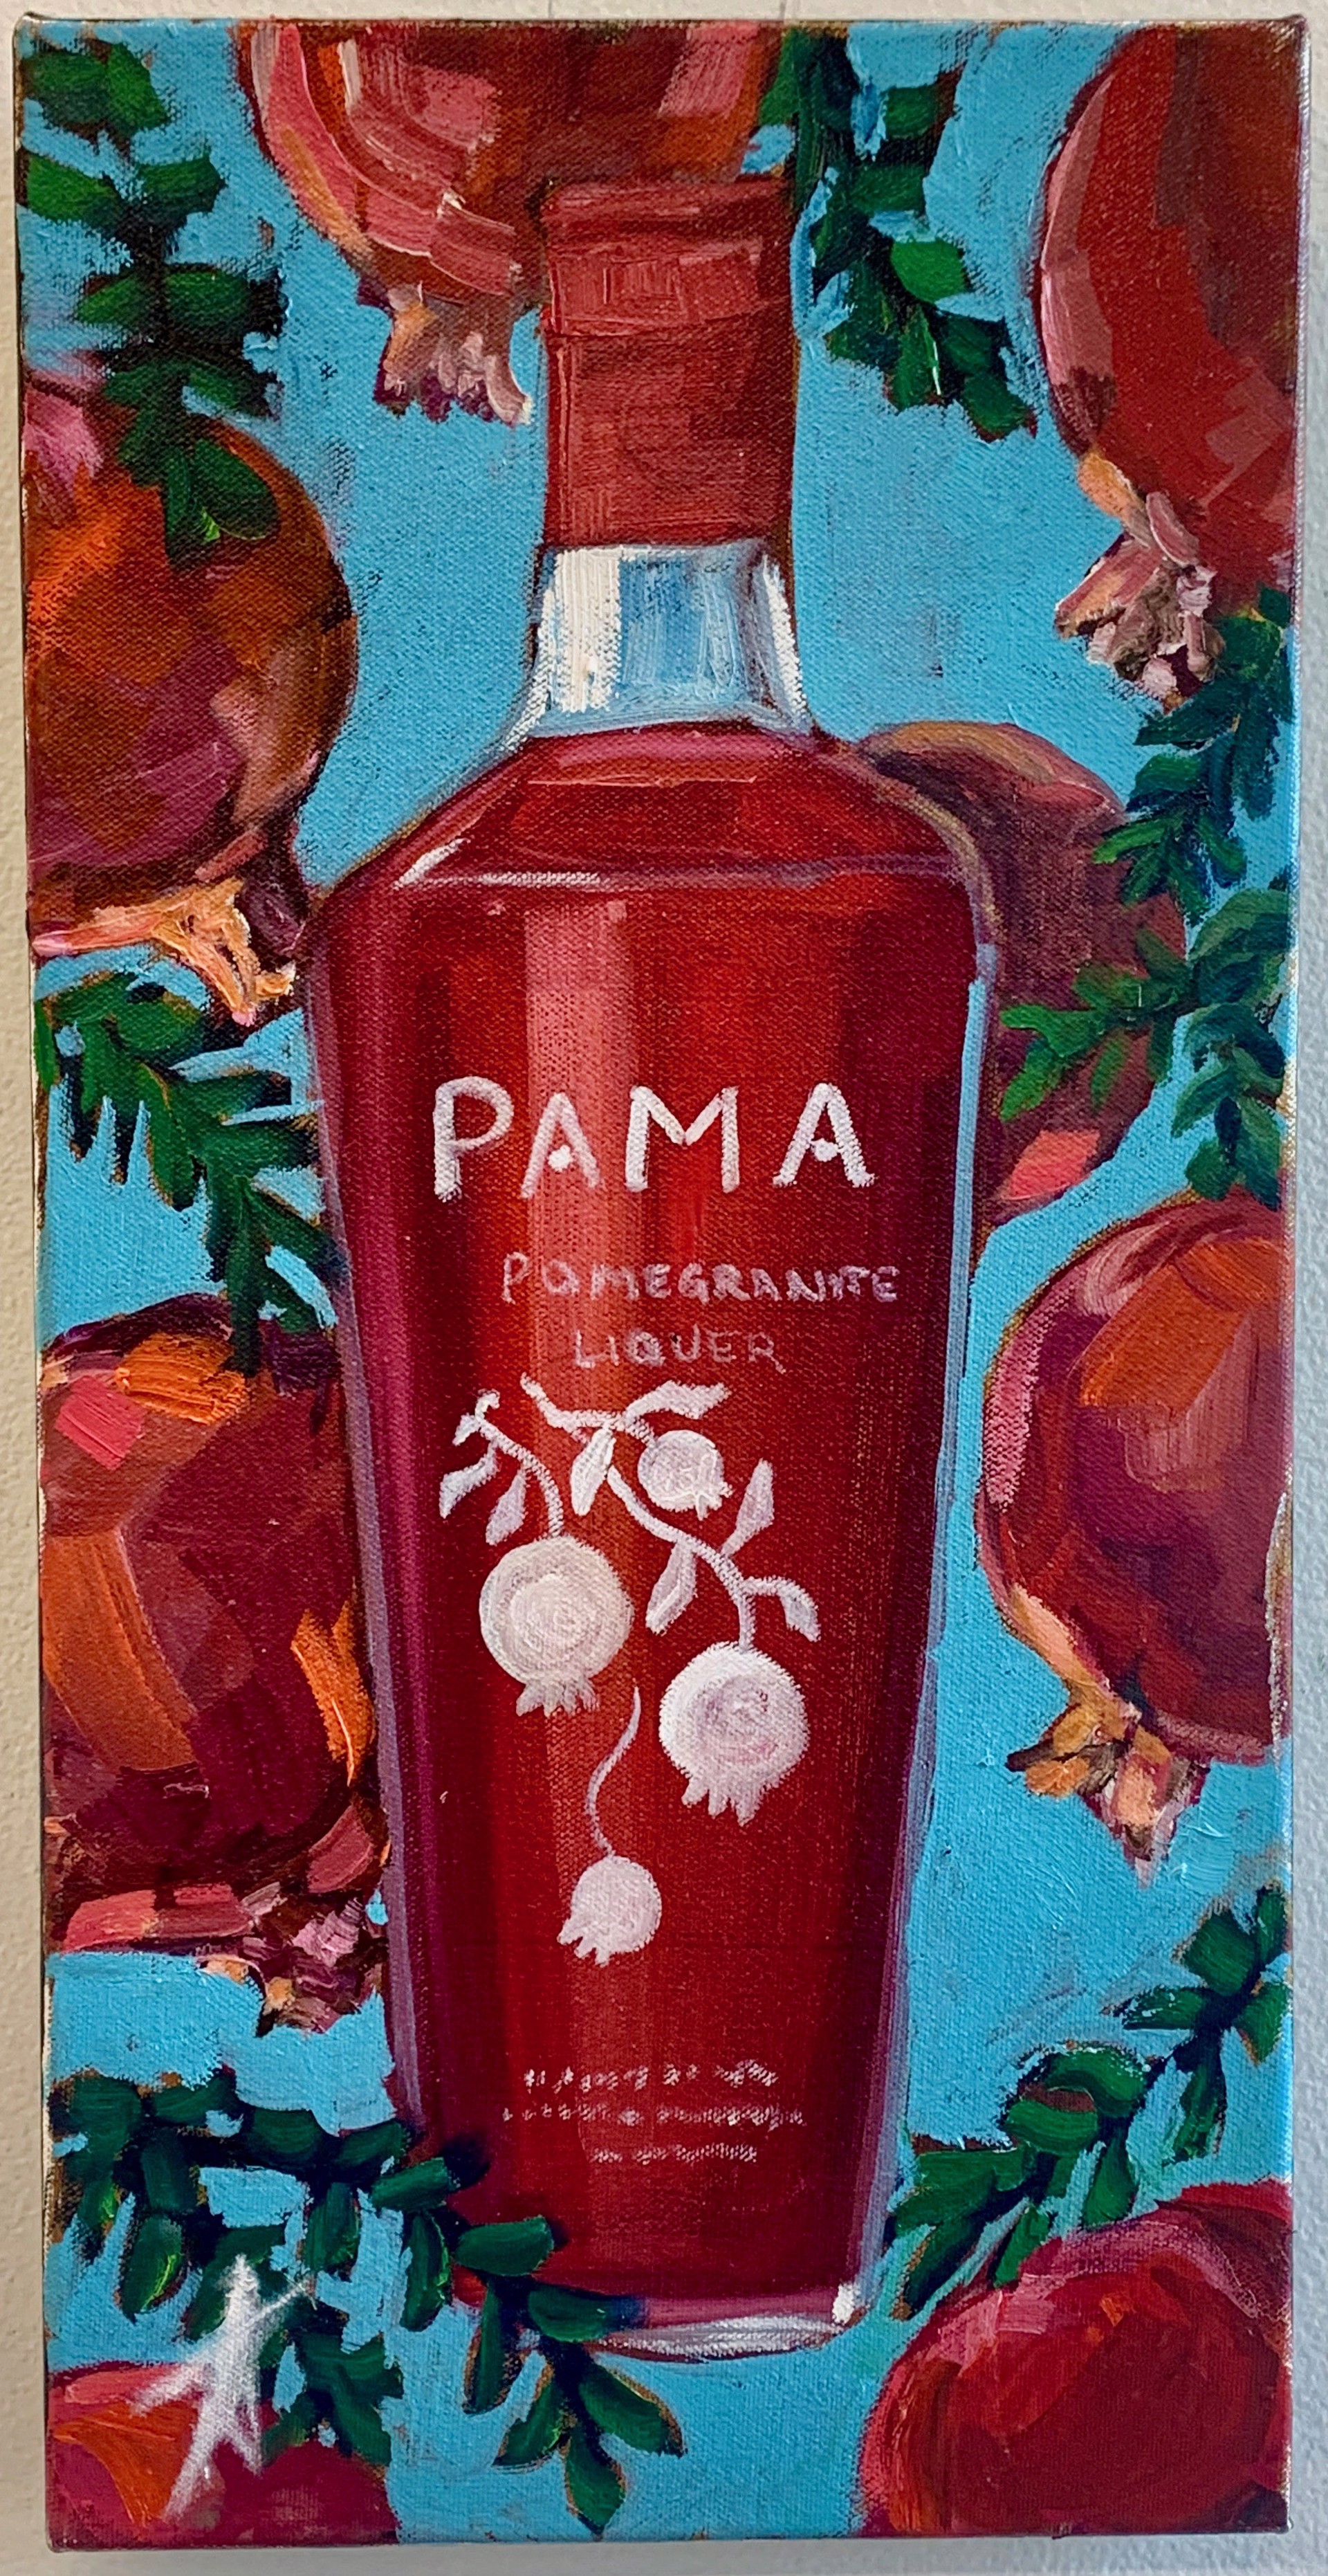 PAMA by Starr Marchand